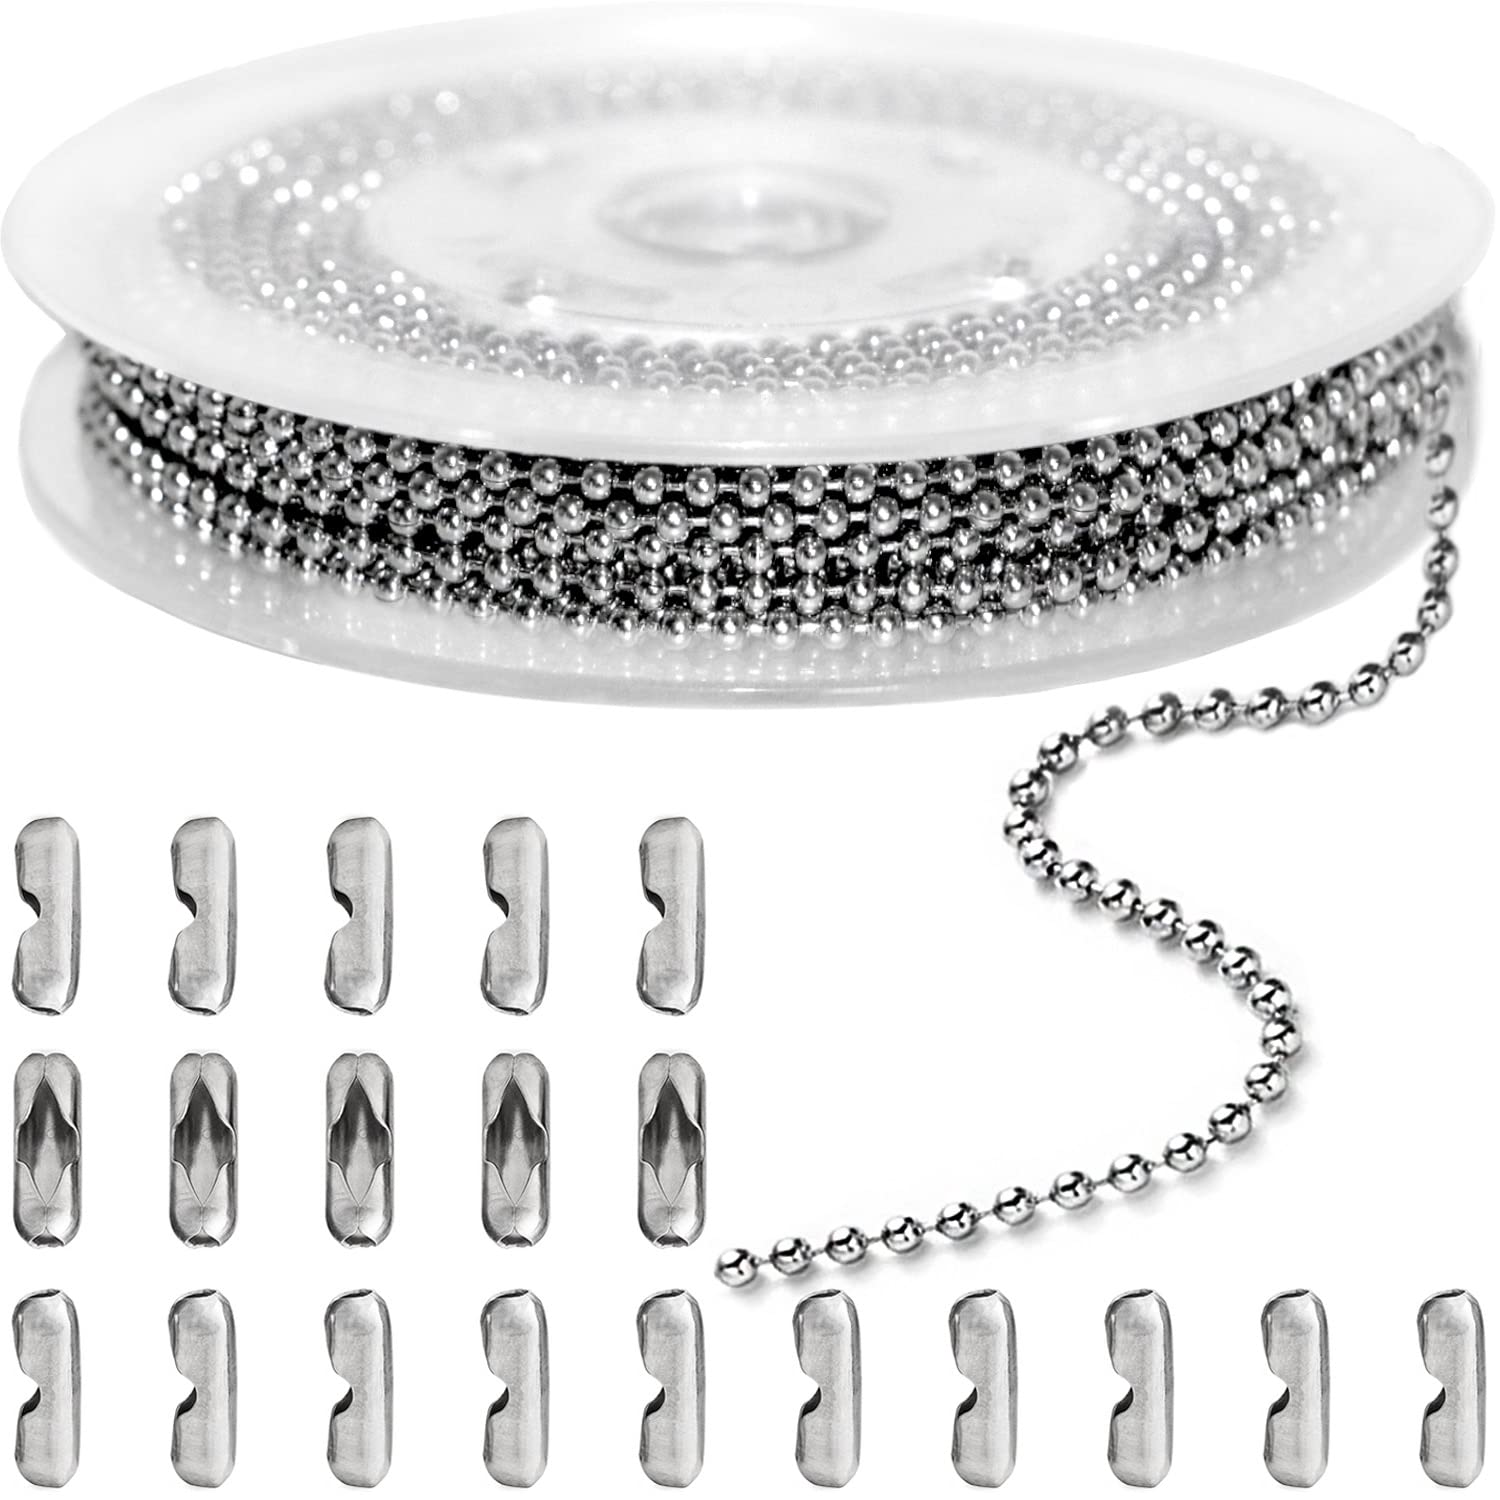 304 Stainless Steel Ball Chain Connectors 